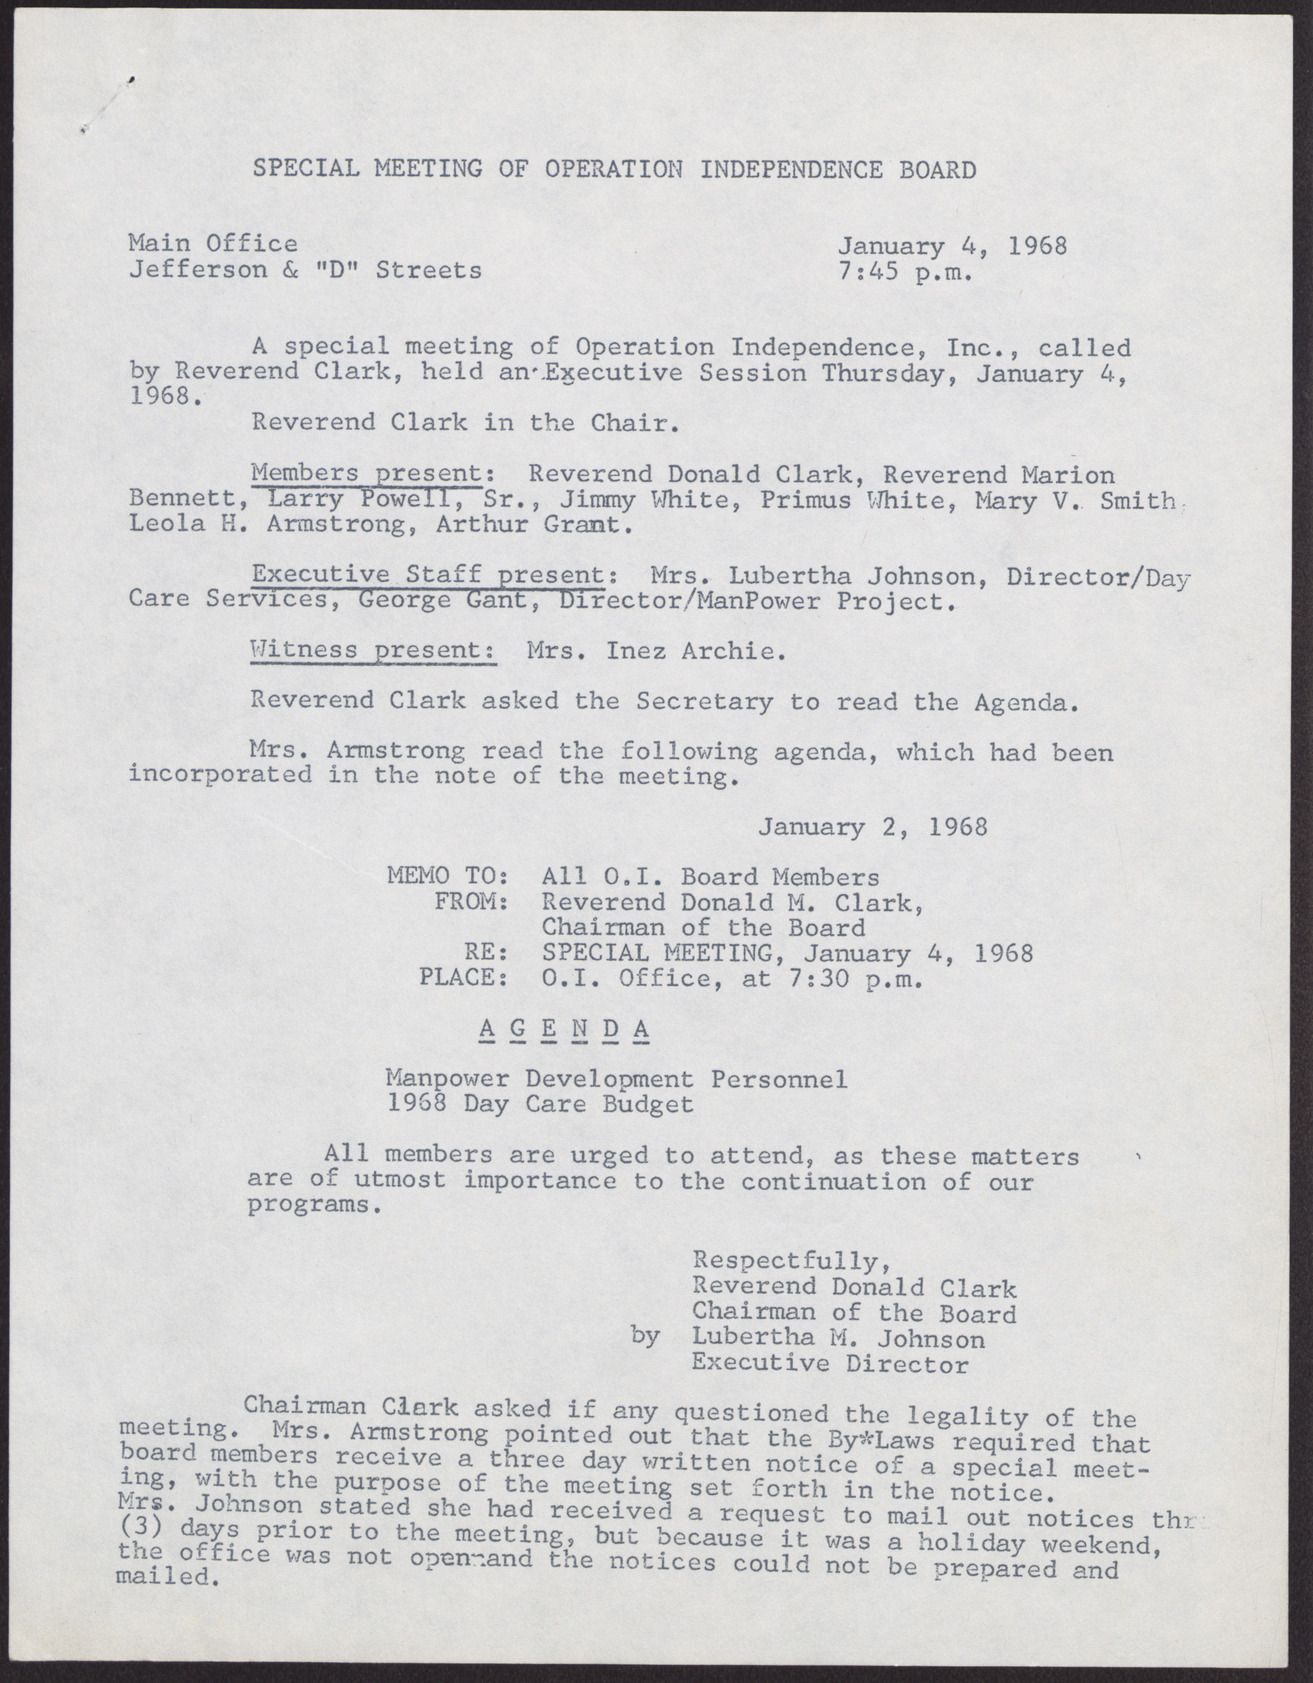 Minutes of Special Meeting of Operation Independence Board (5 pages), January 4, 1968